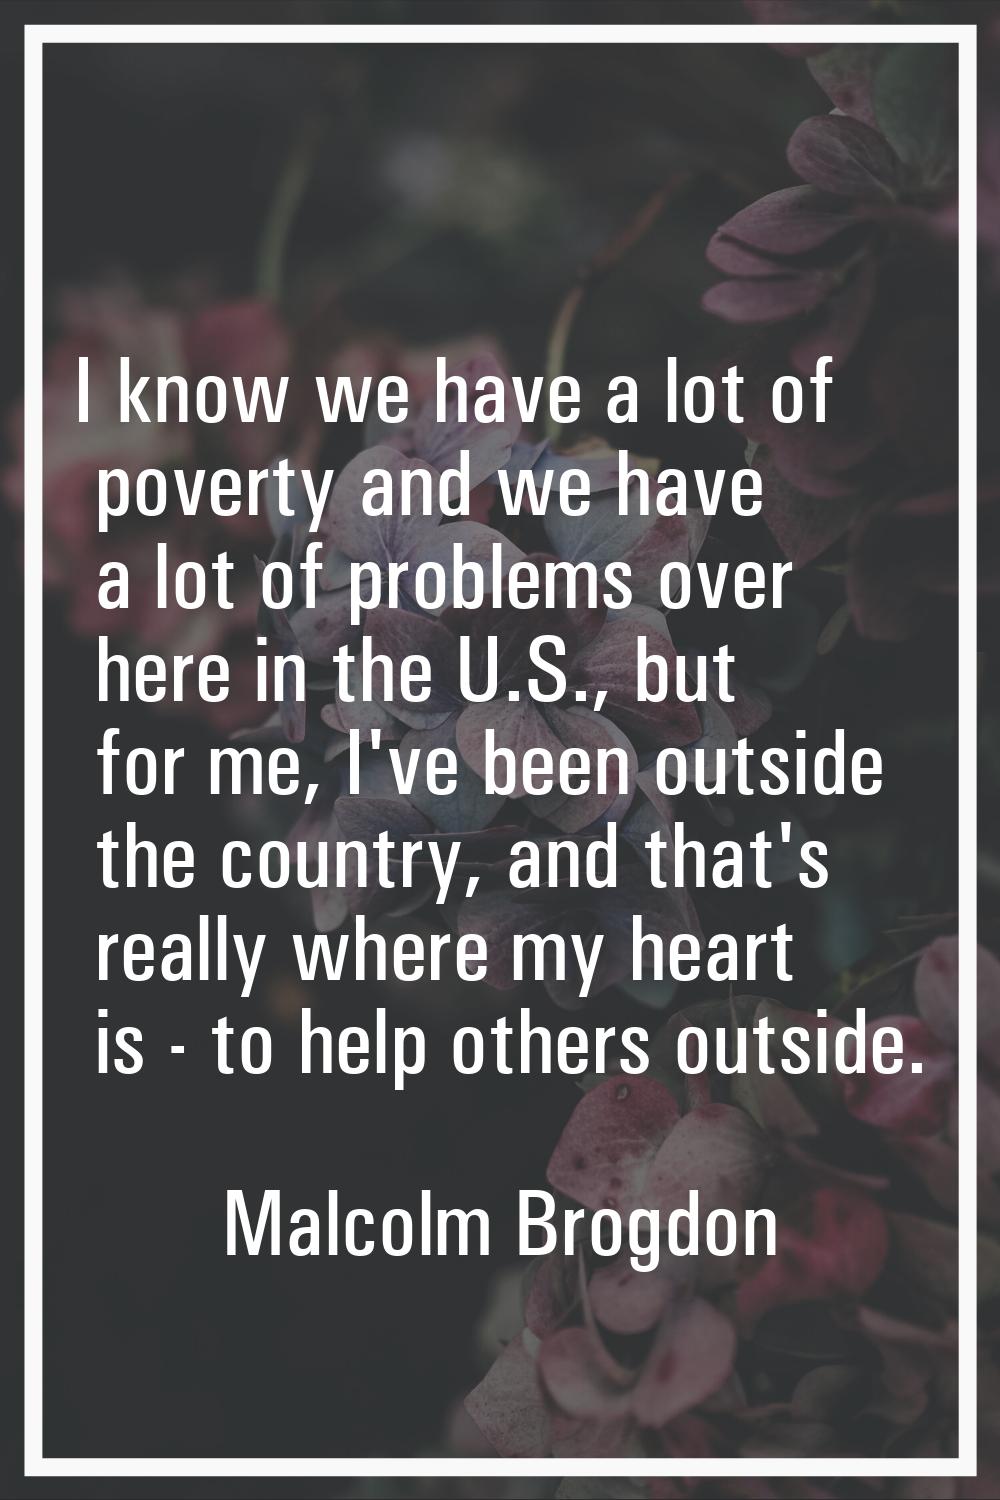 I know we have a lot of poverty and we have a lot of problems over here in the U.S., but for me, I'